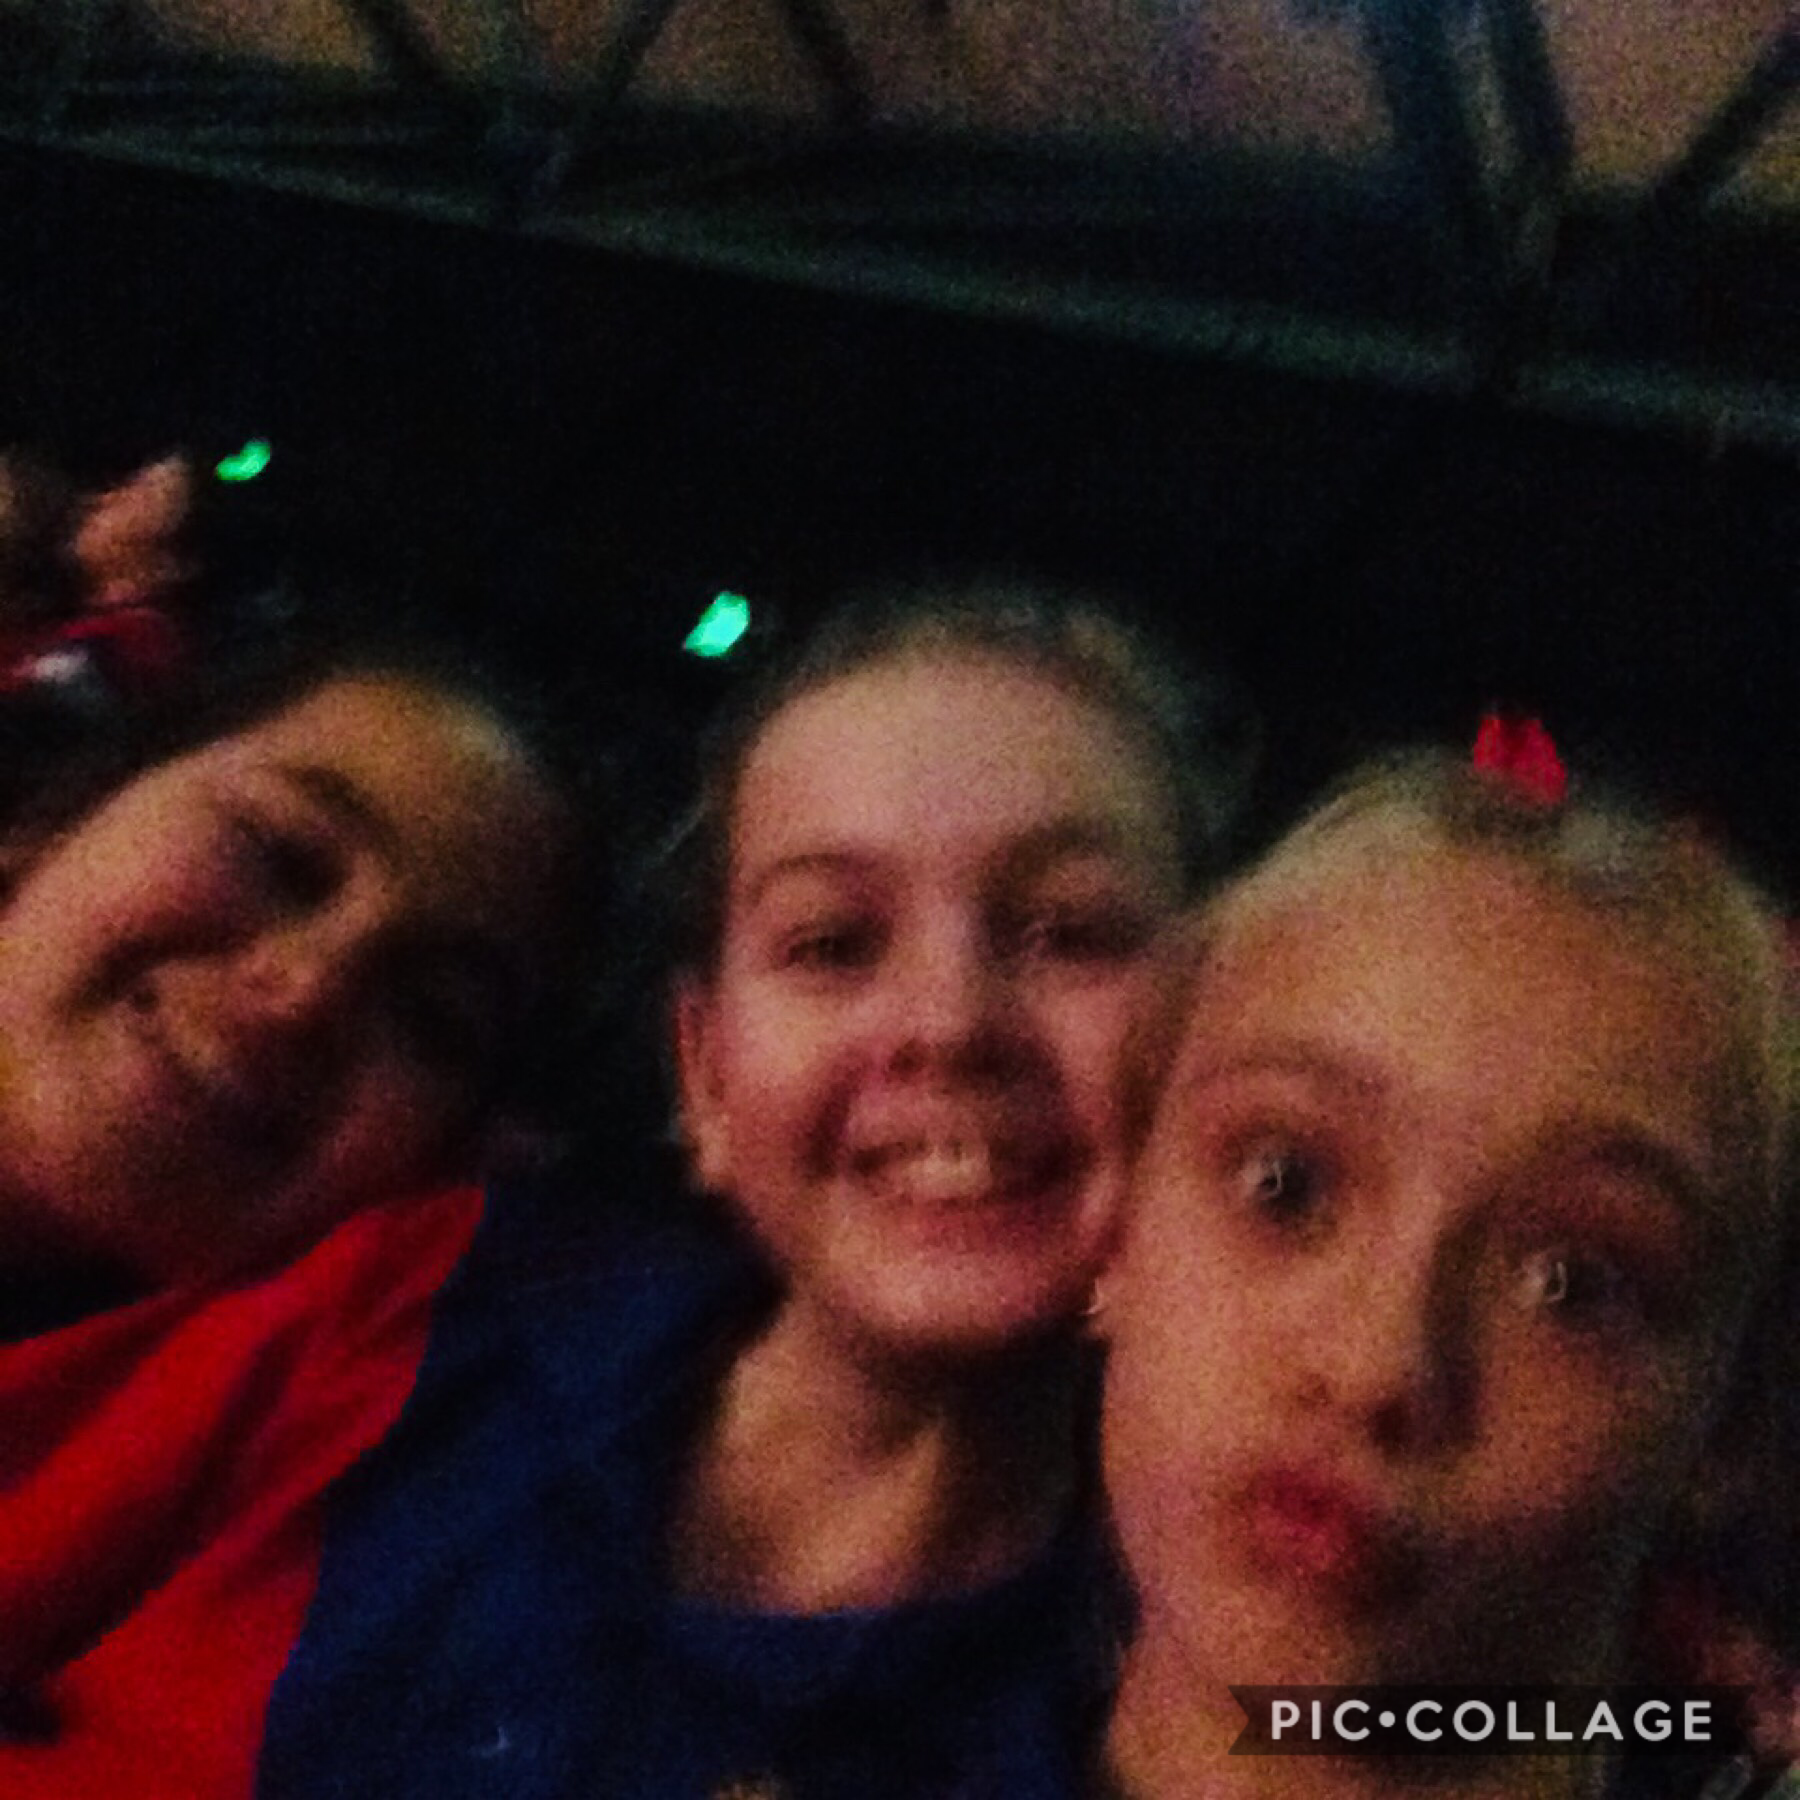 When your sister steals your device and take selfies with your friends!